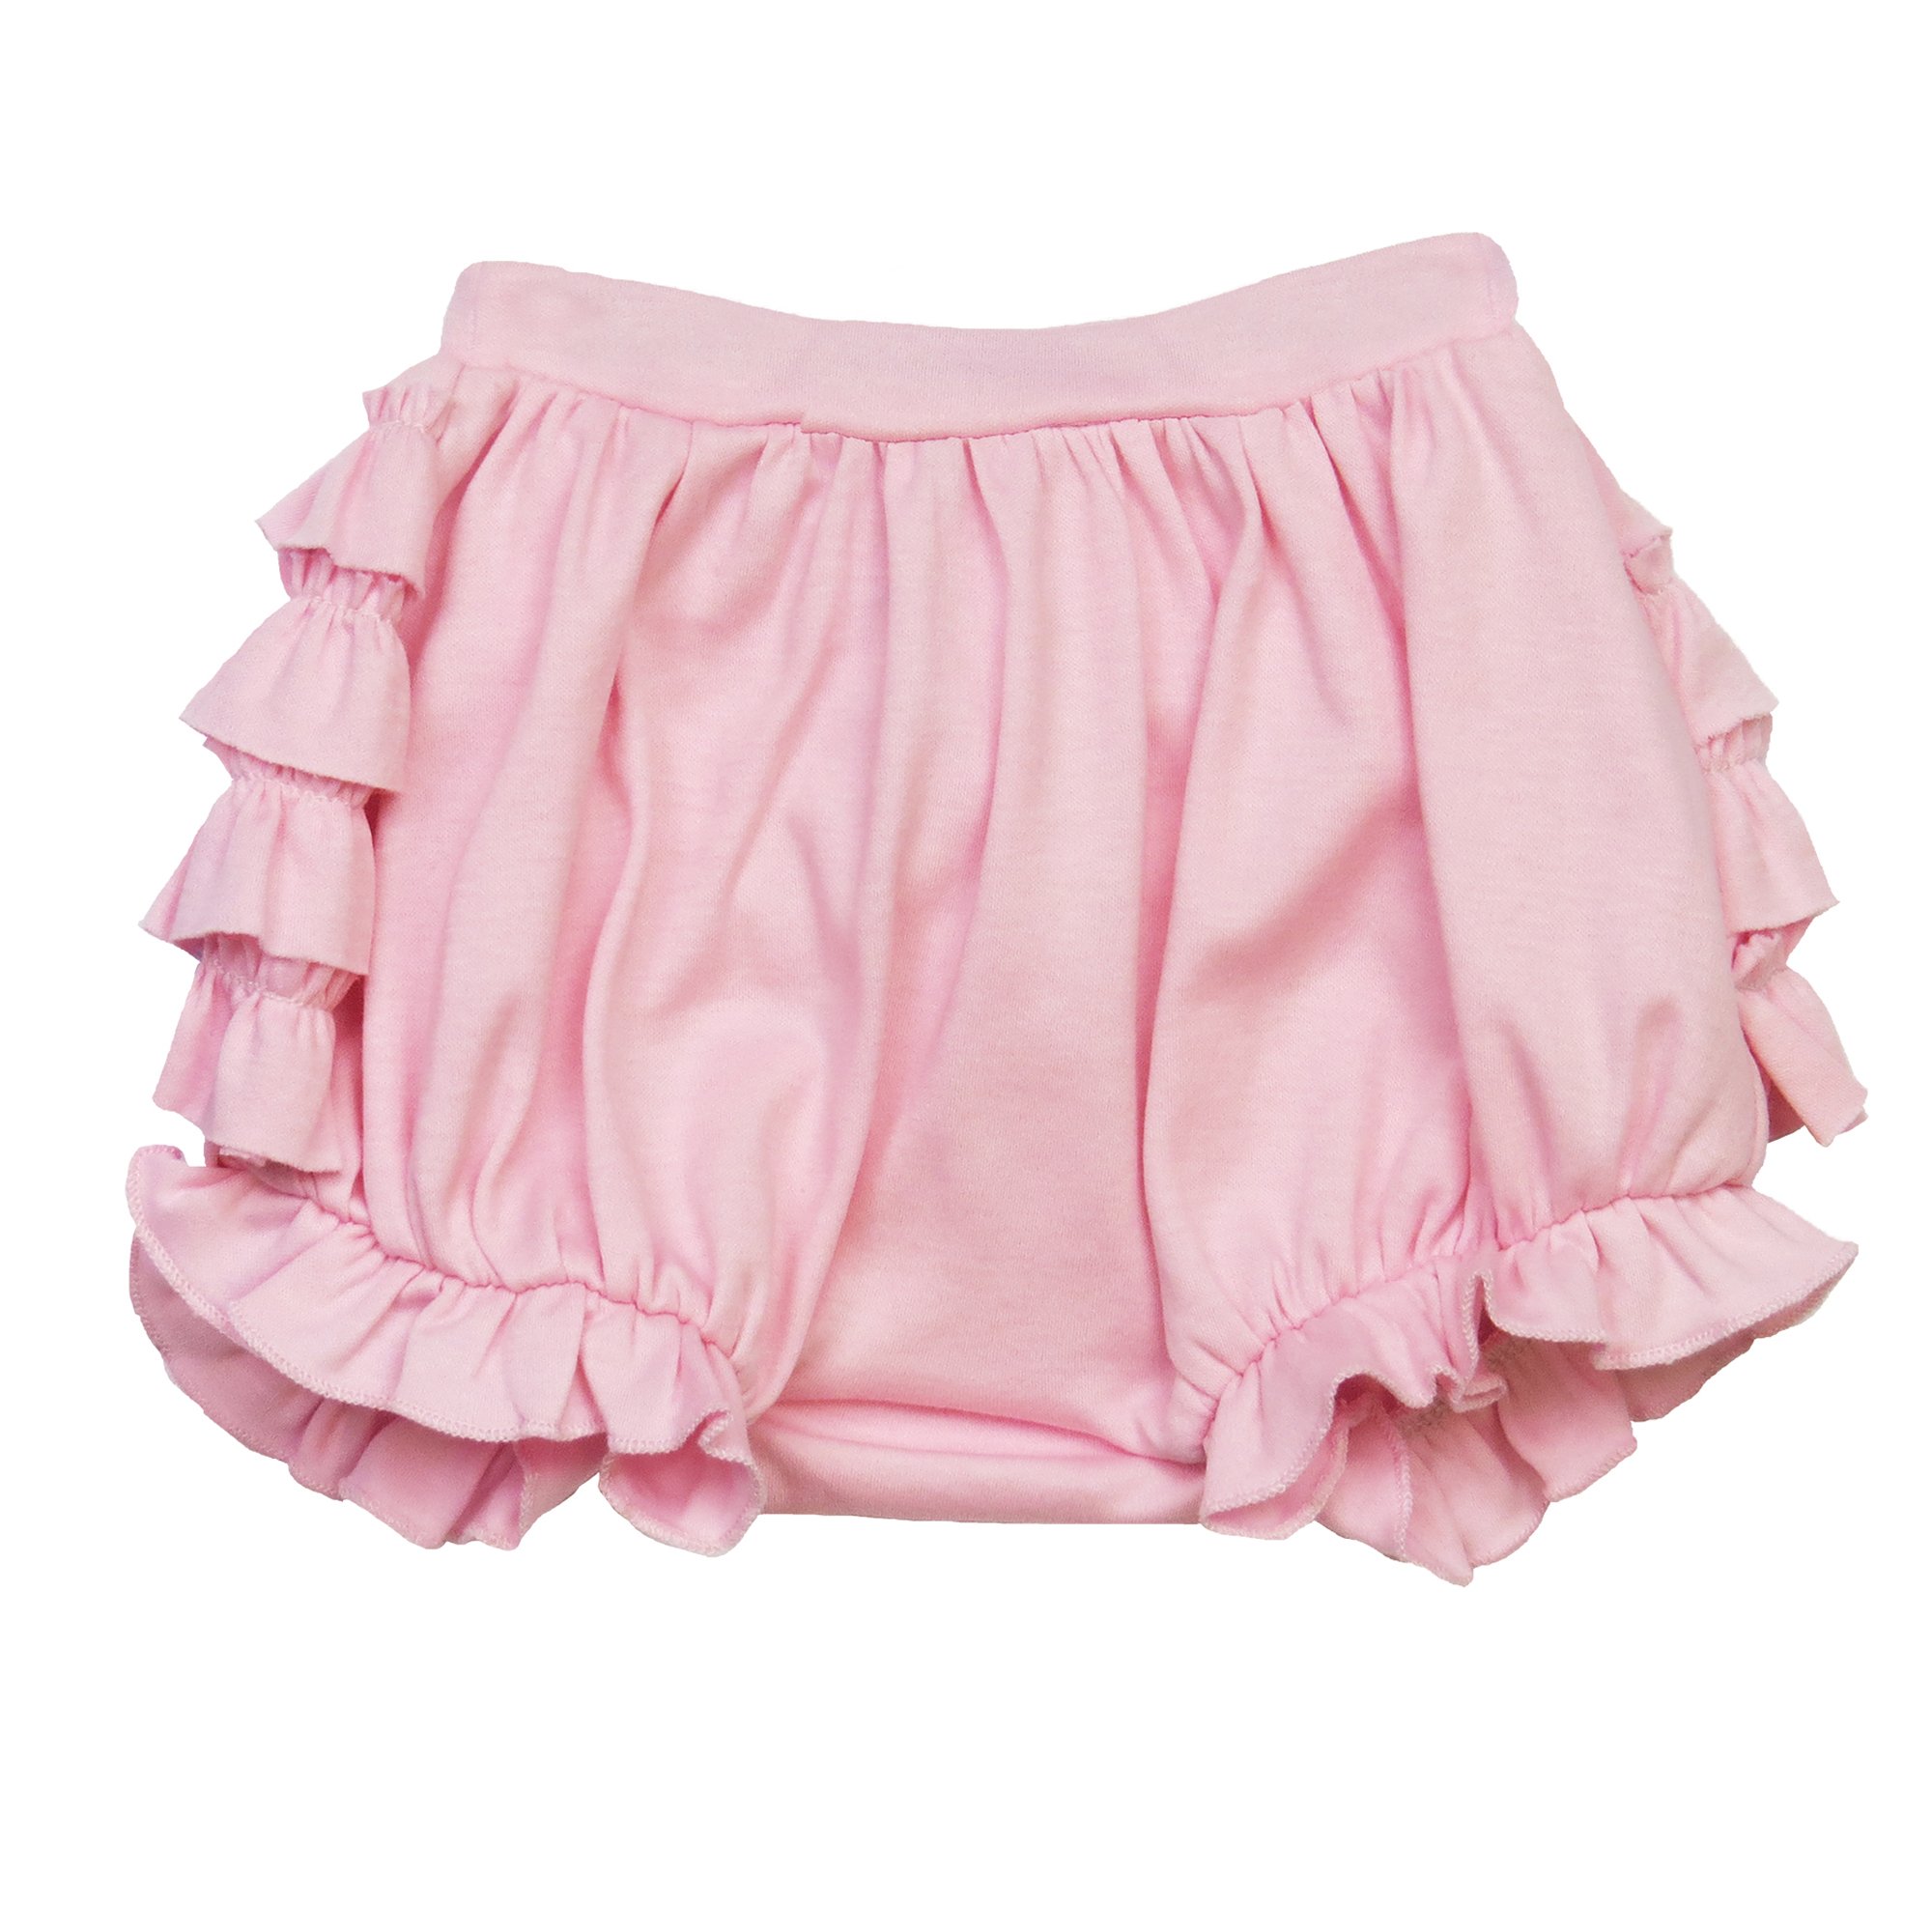 Lemon Loves Layette Bonnie Bloomers for Baby Girls in Pink